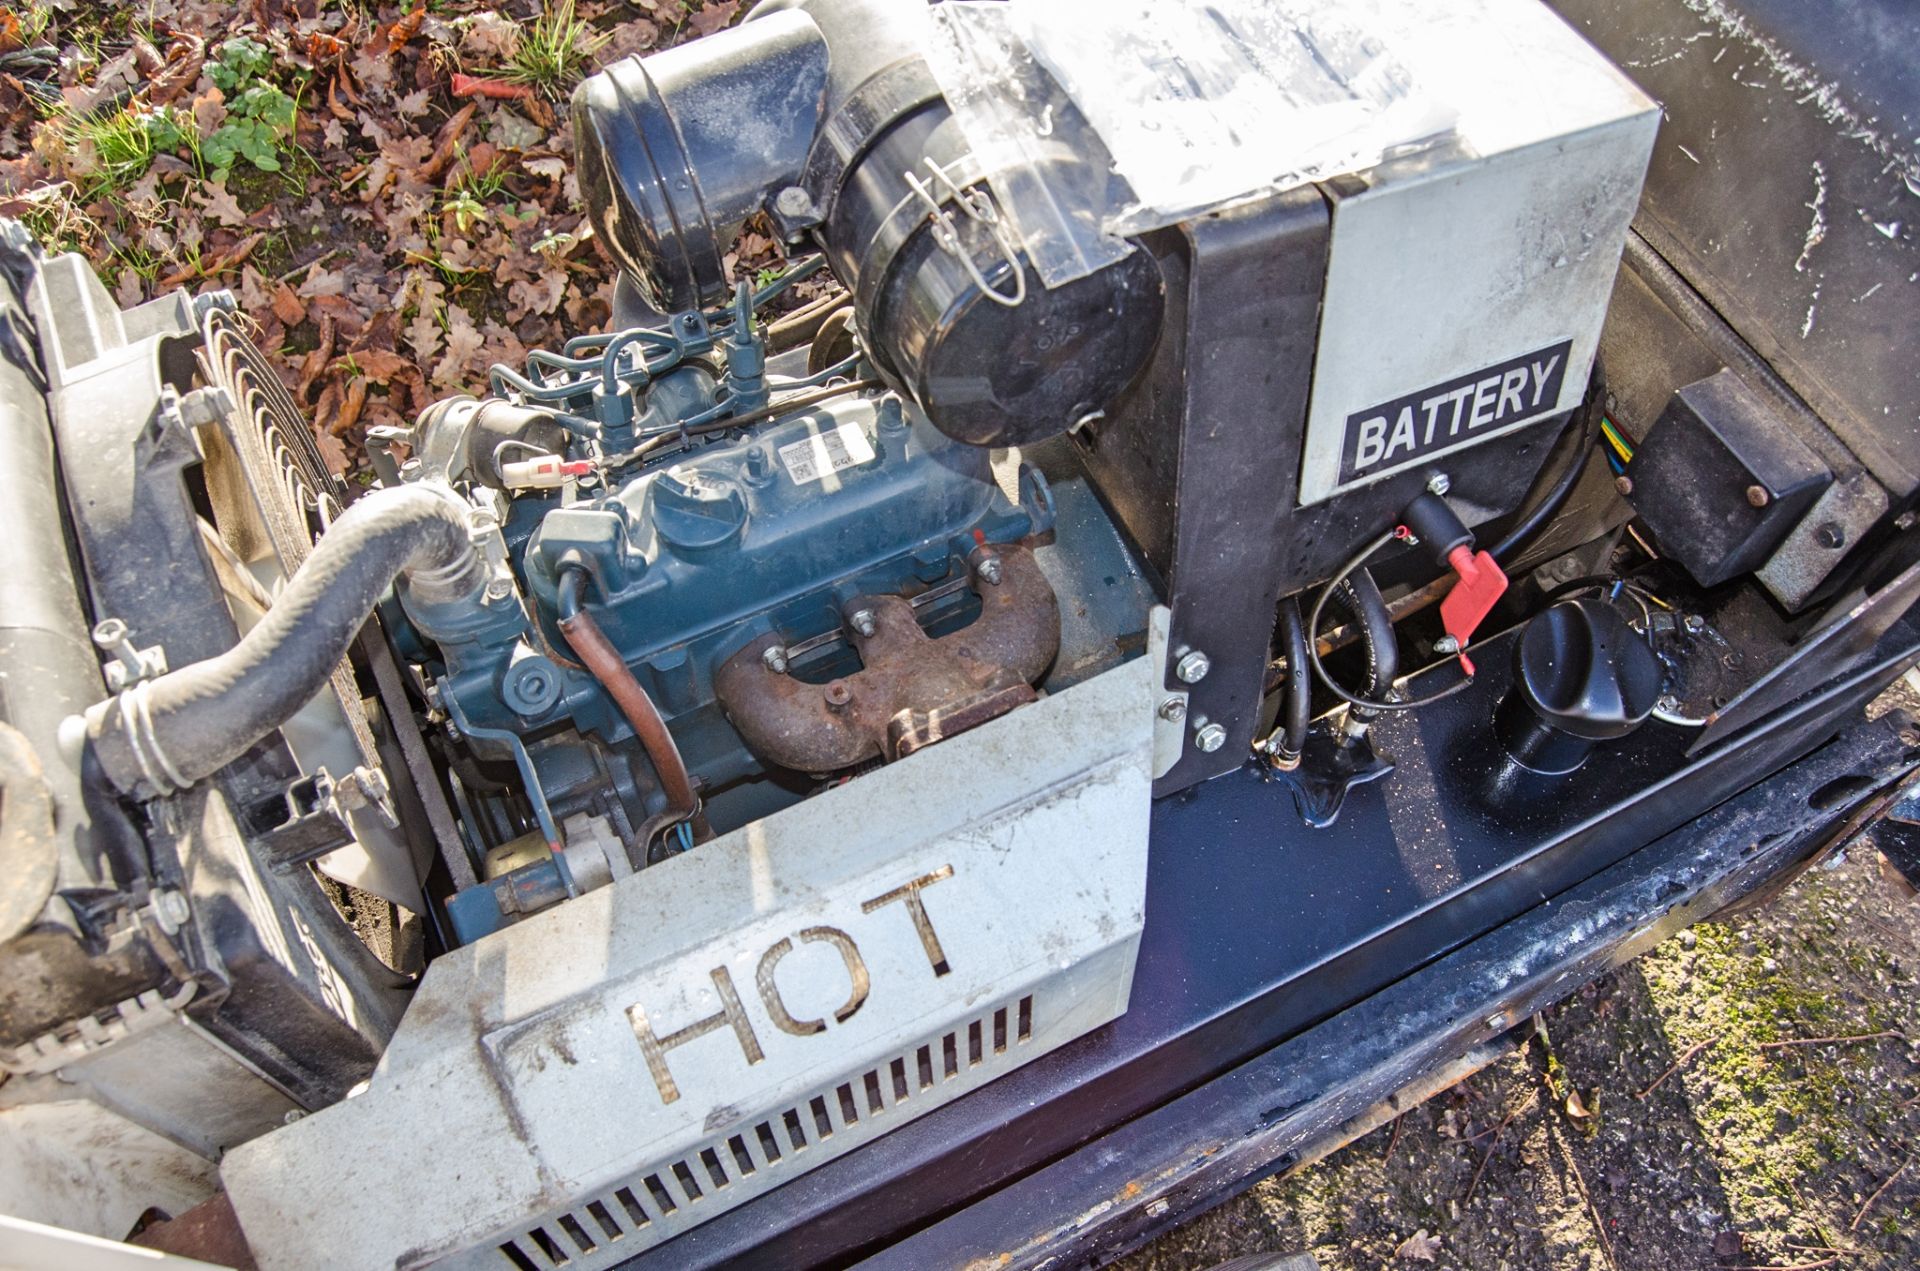 MHM MG10000 SSK-V 10 kva diesel driven generator S/N: 229150122 Recorded hours: 3502 A723472 - Image 5 of 6